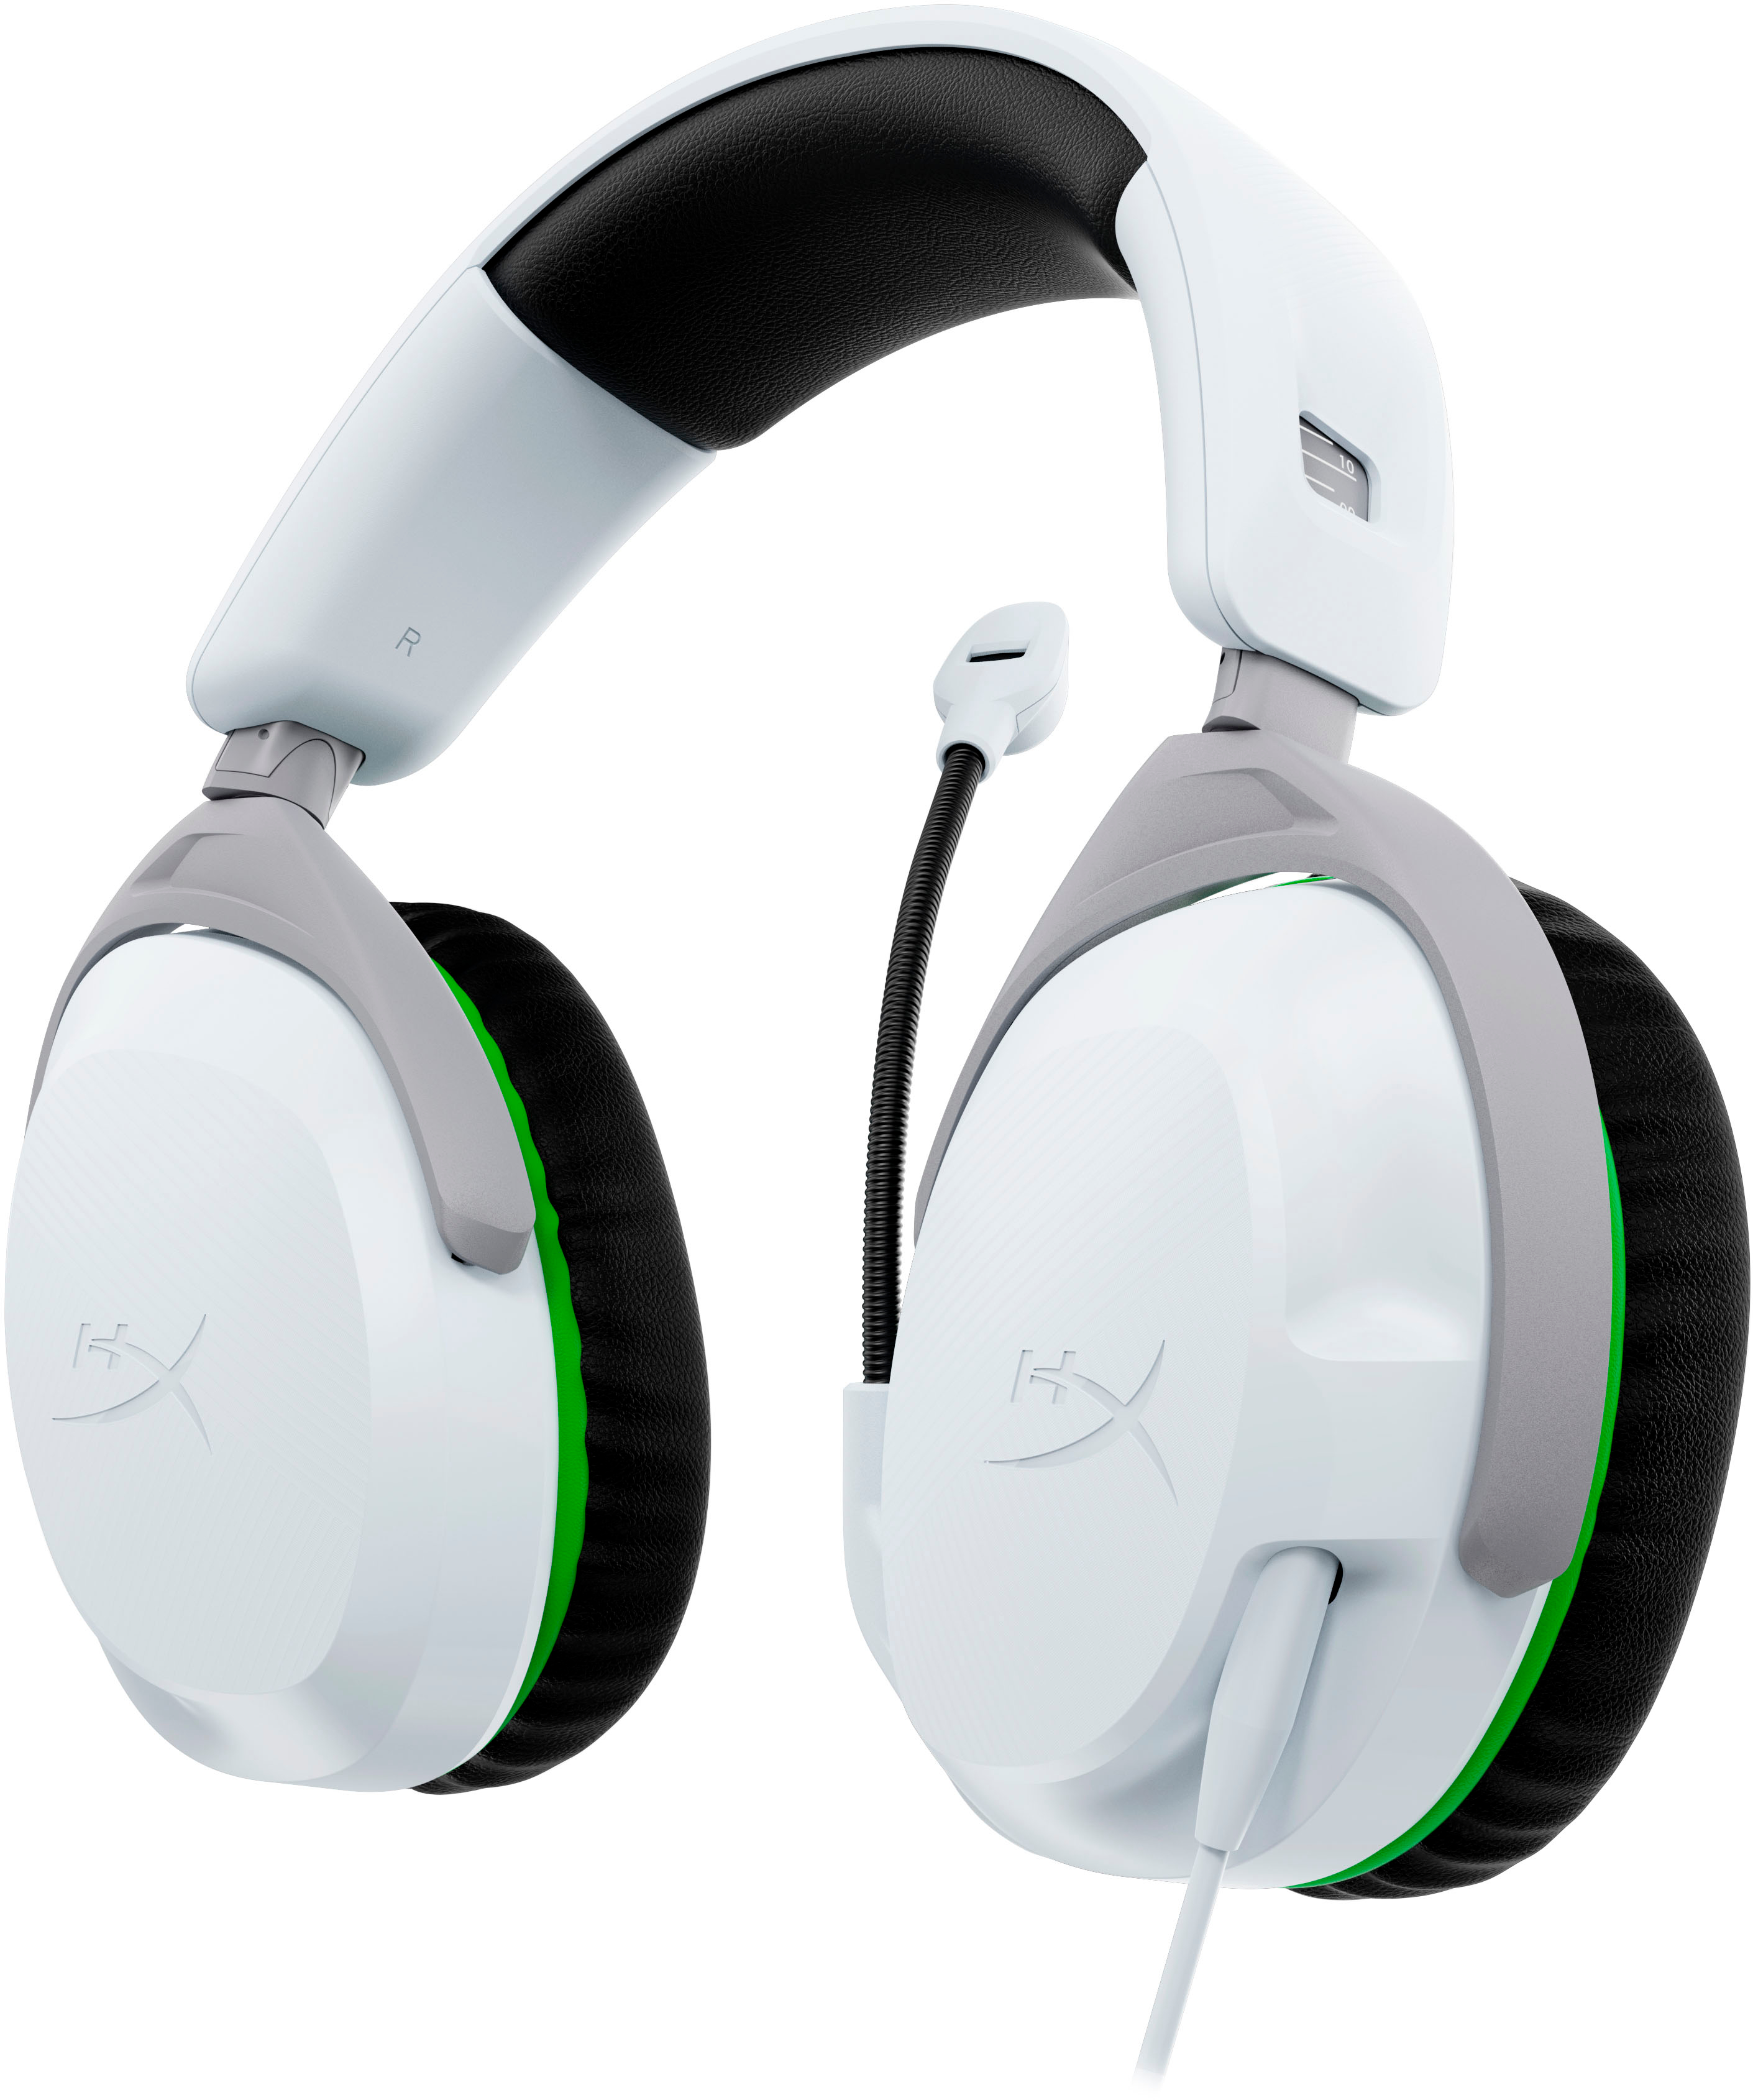 Buy Headset Wired Best for 75X28AA Xbox Gaming HyperX - CloudX Stinger White 2